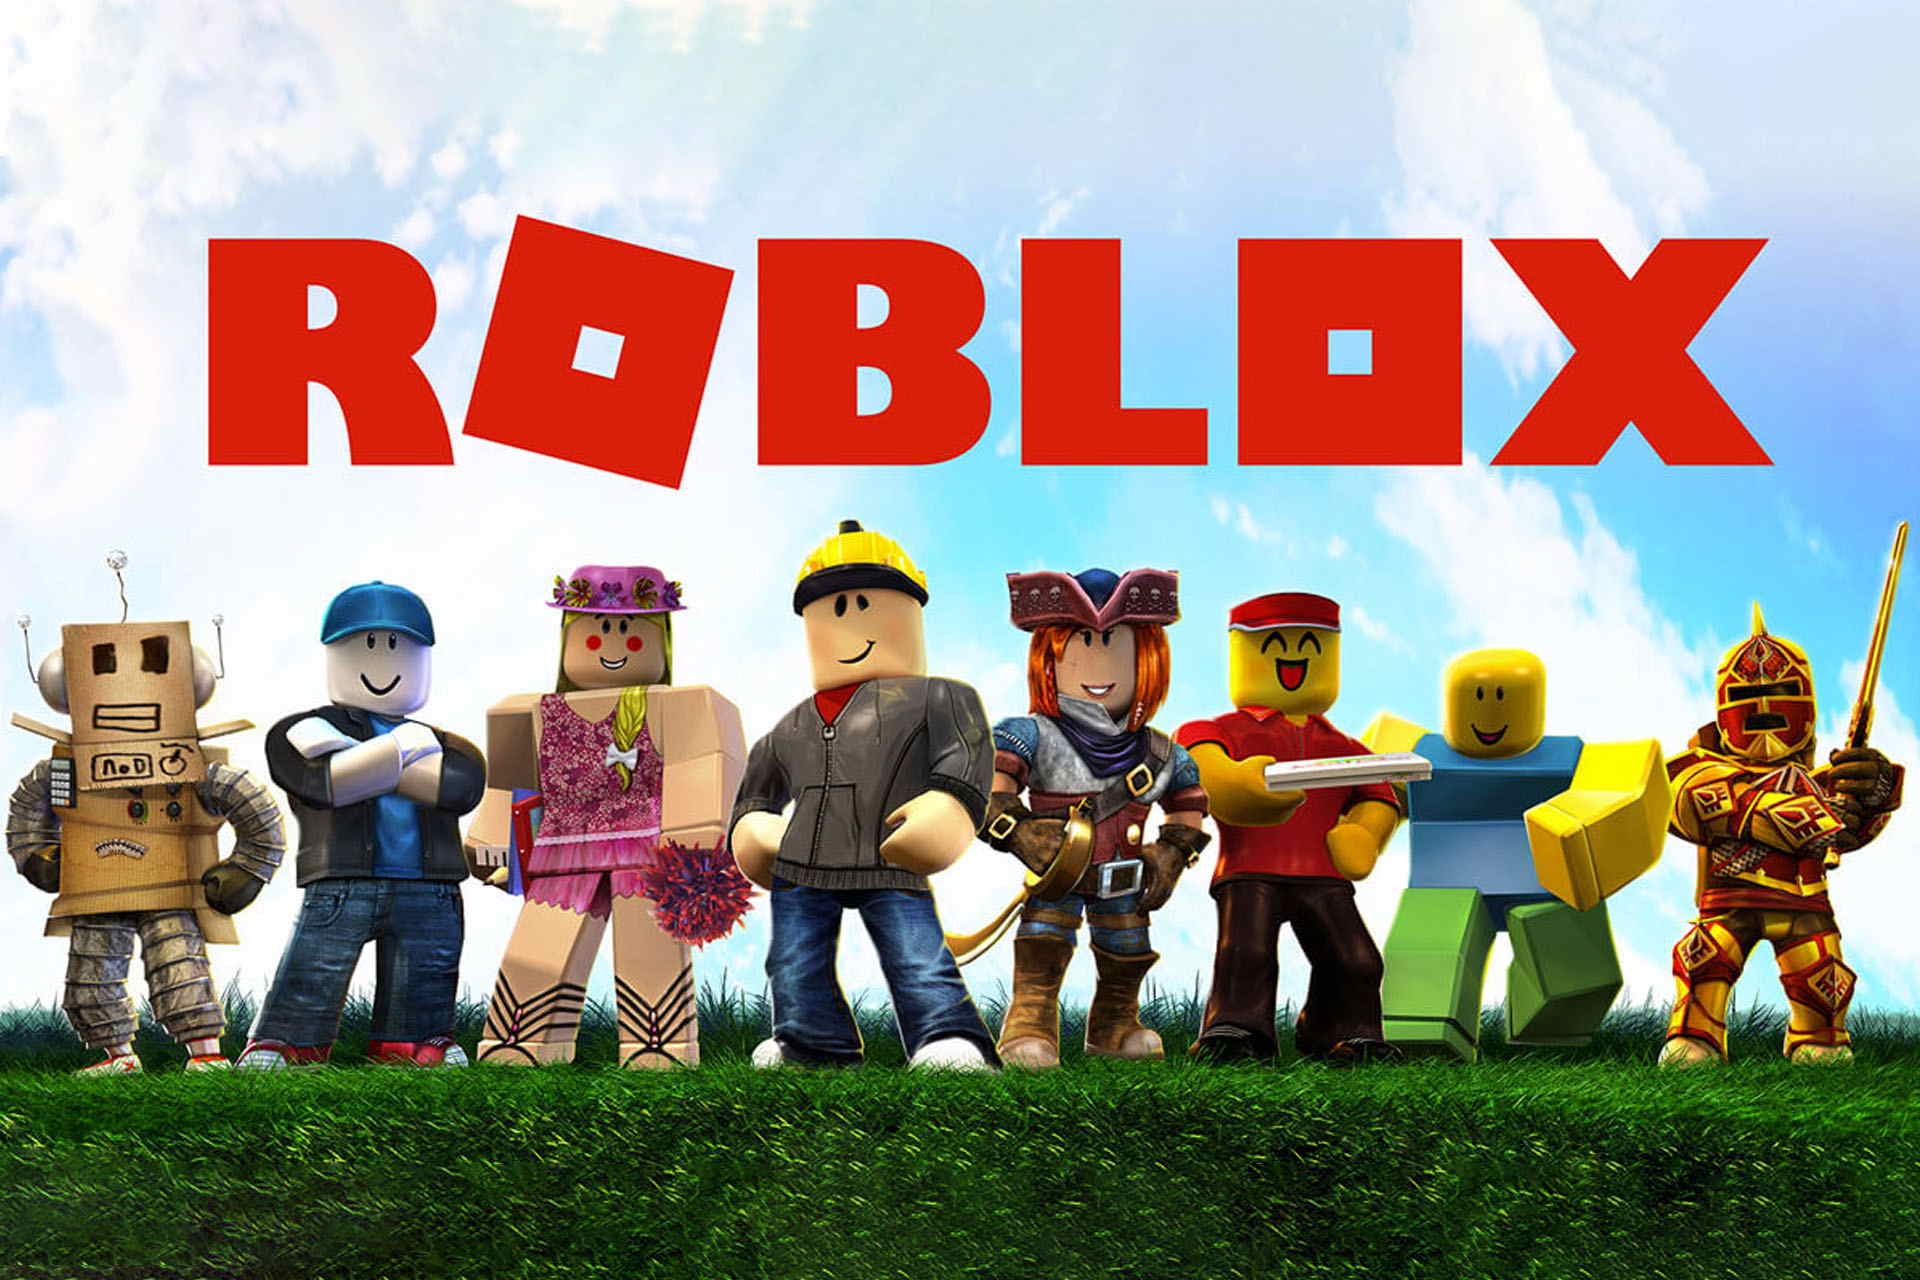 Roblox Background Explore more Corporation., Movement, Online game, Play  Games, Program Games wallpaper.  -background-3/